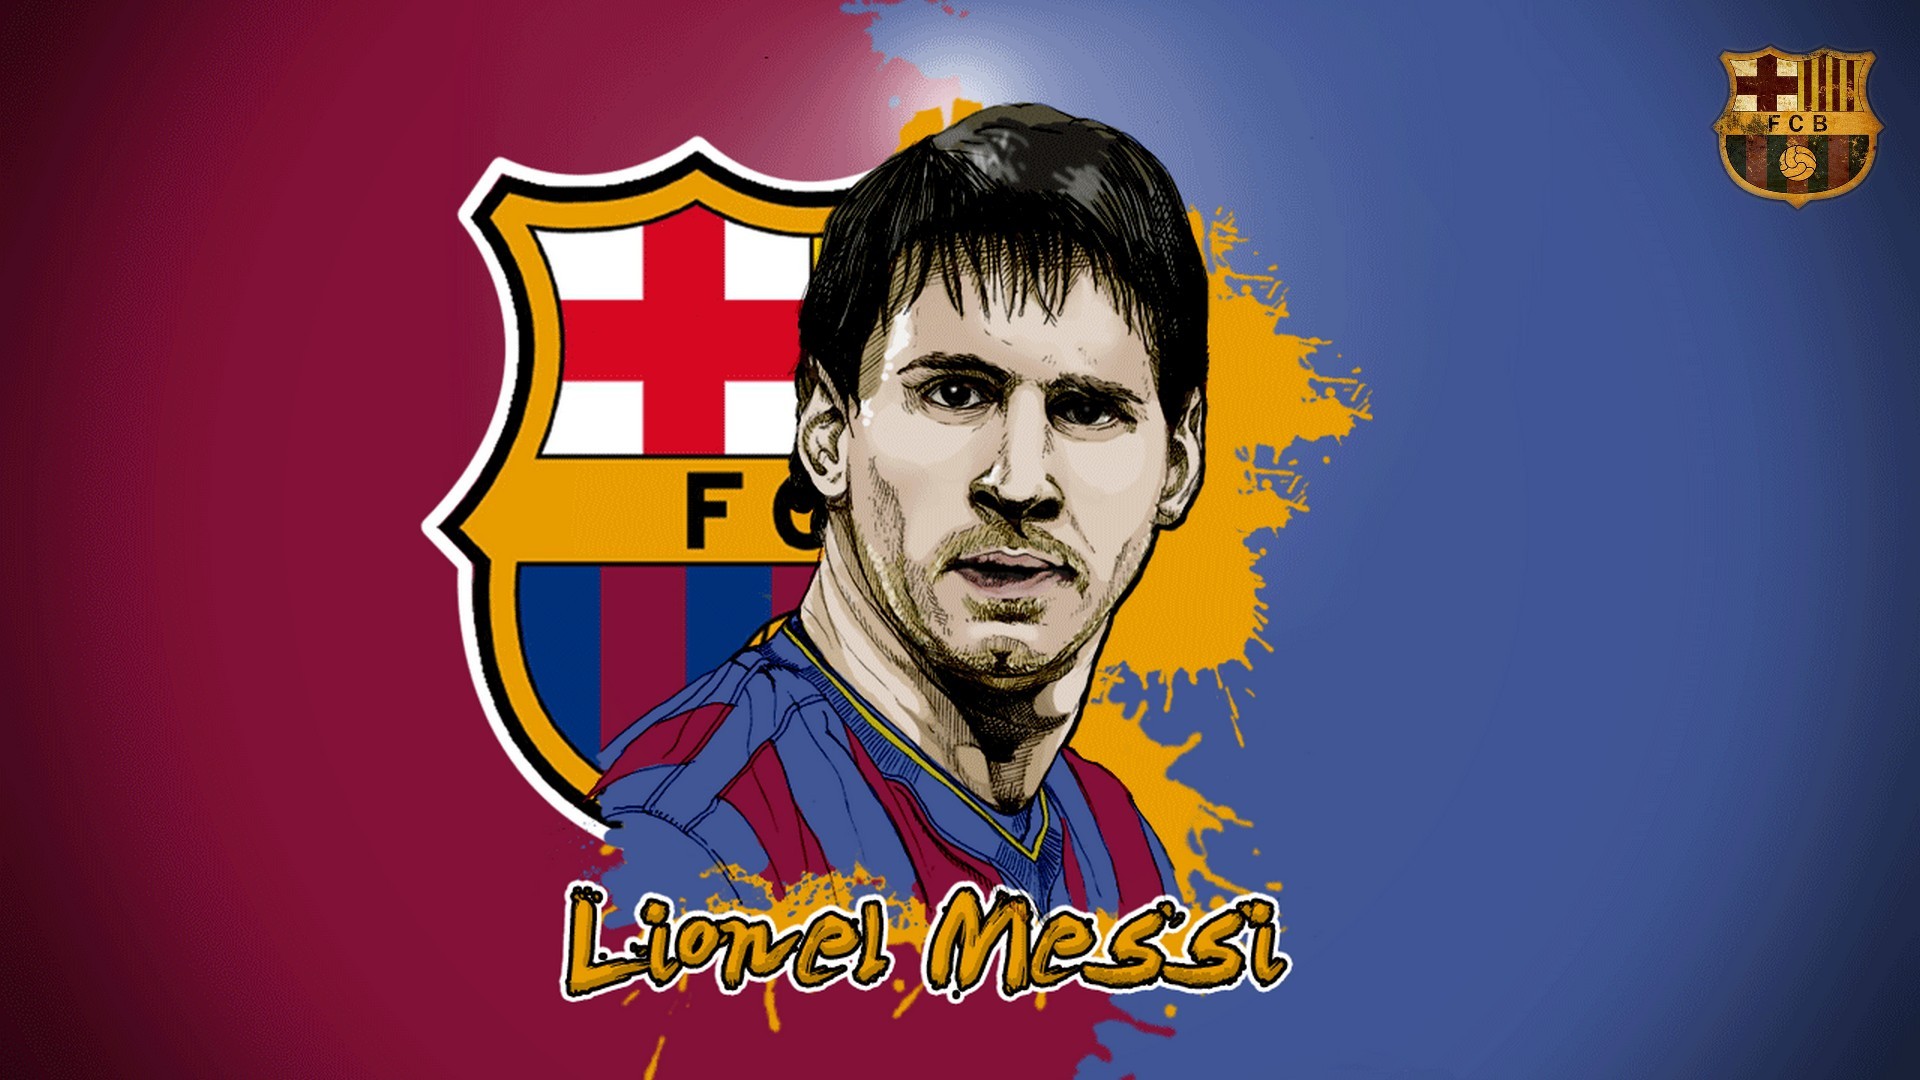 HD Leo Messi Wallpapers with resolution 1920x1080 pixel. You can make this wallpaper for your Mac or Windows Desktop Background, iPhone, Android or Tablet and another Smartphone device